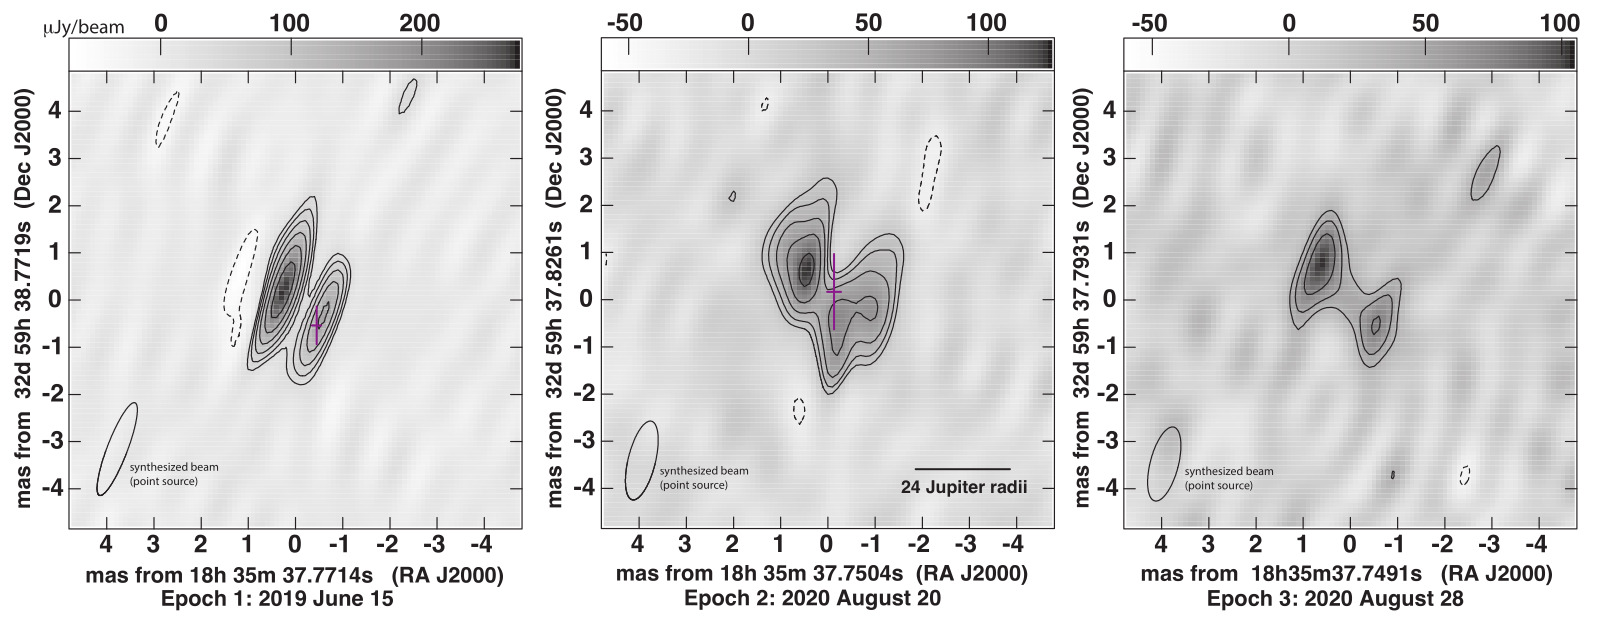 Three epochs of VLBI imaging of LSR J1835+3259 at a spatial resolution
of around 1 mas (Kao et al., Figure 1).